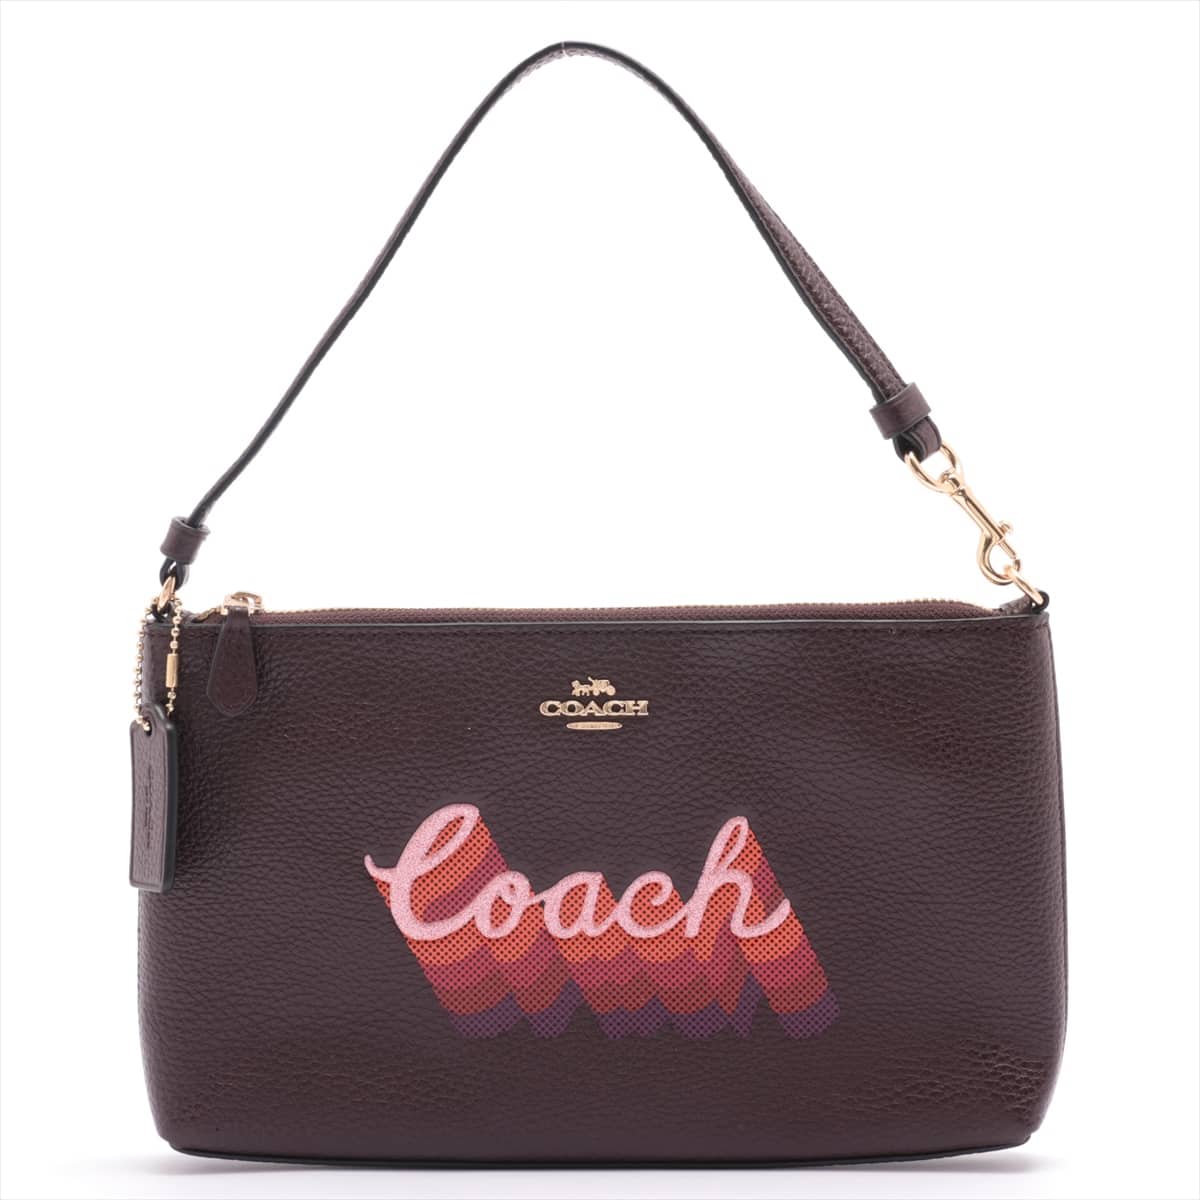 COACH Leather Hand bag Brown